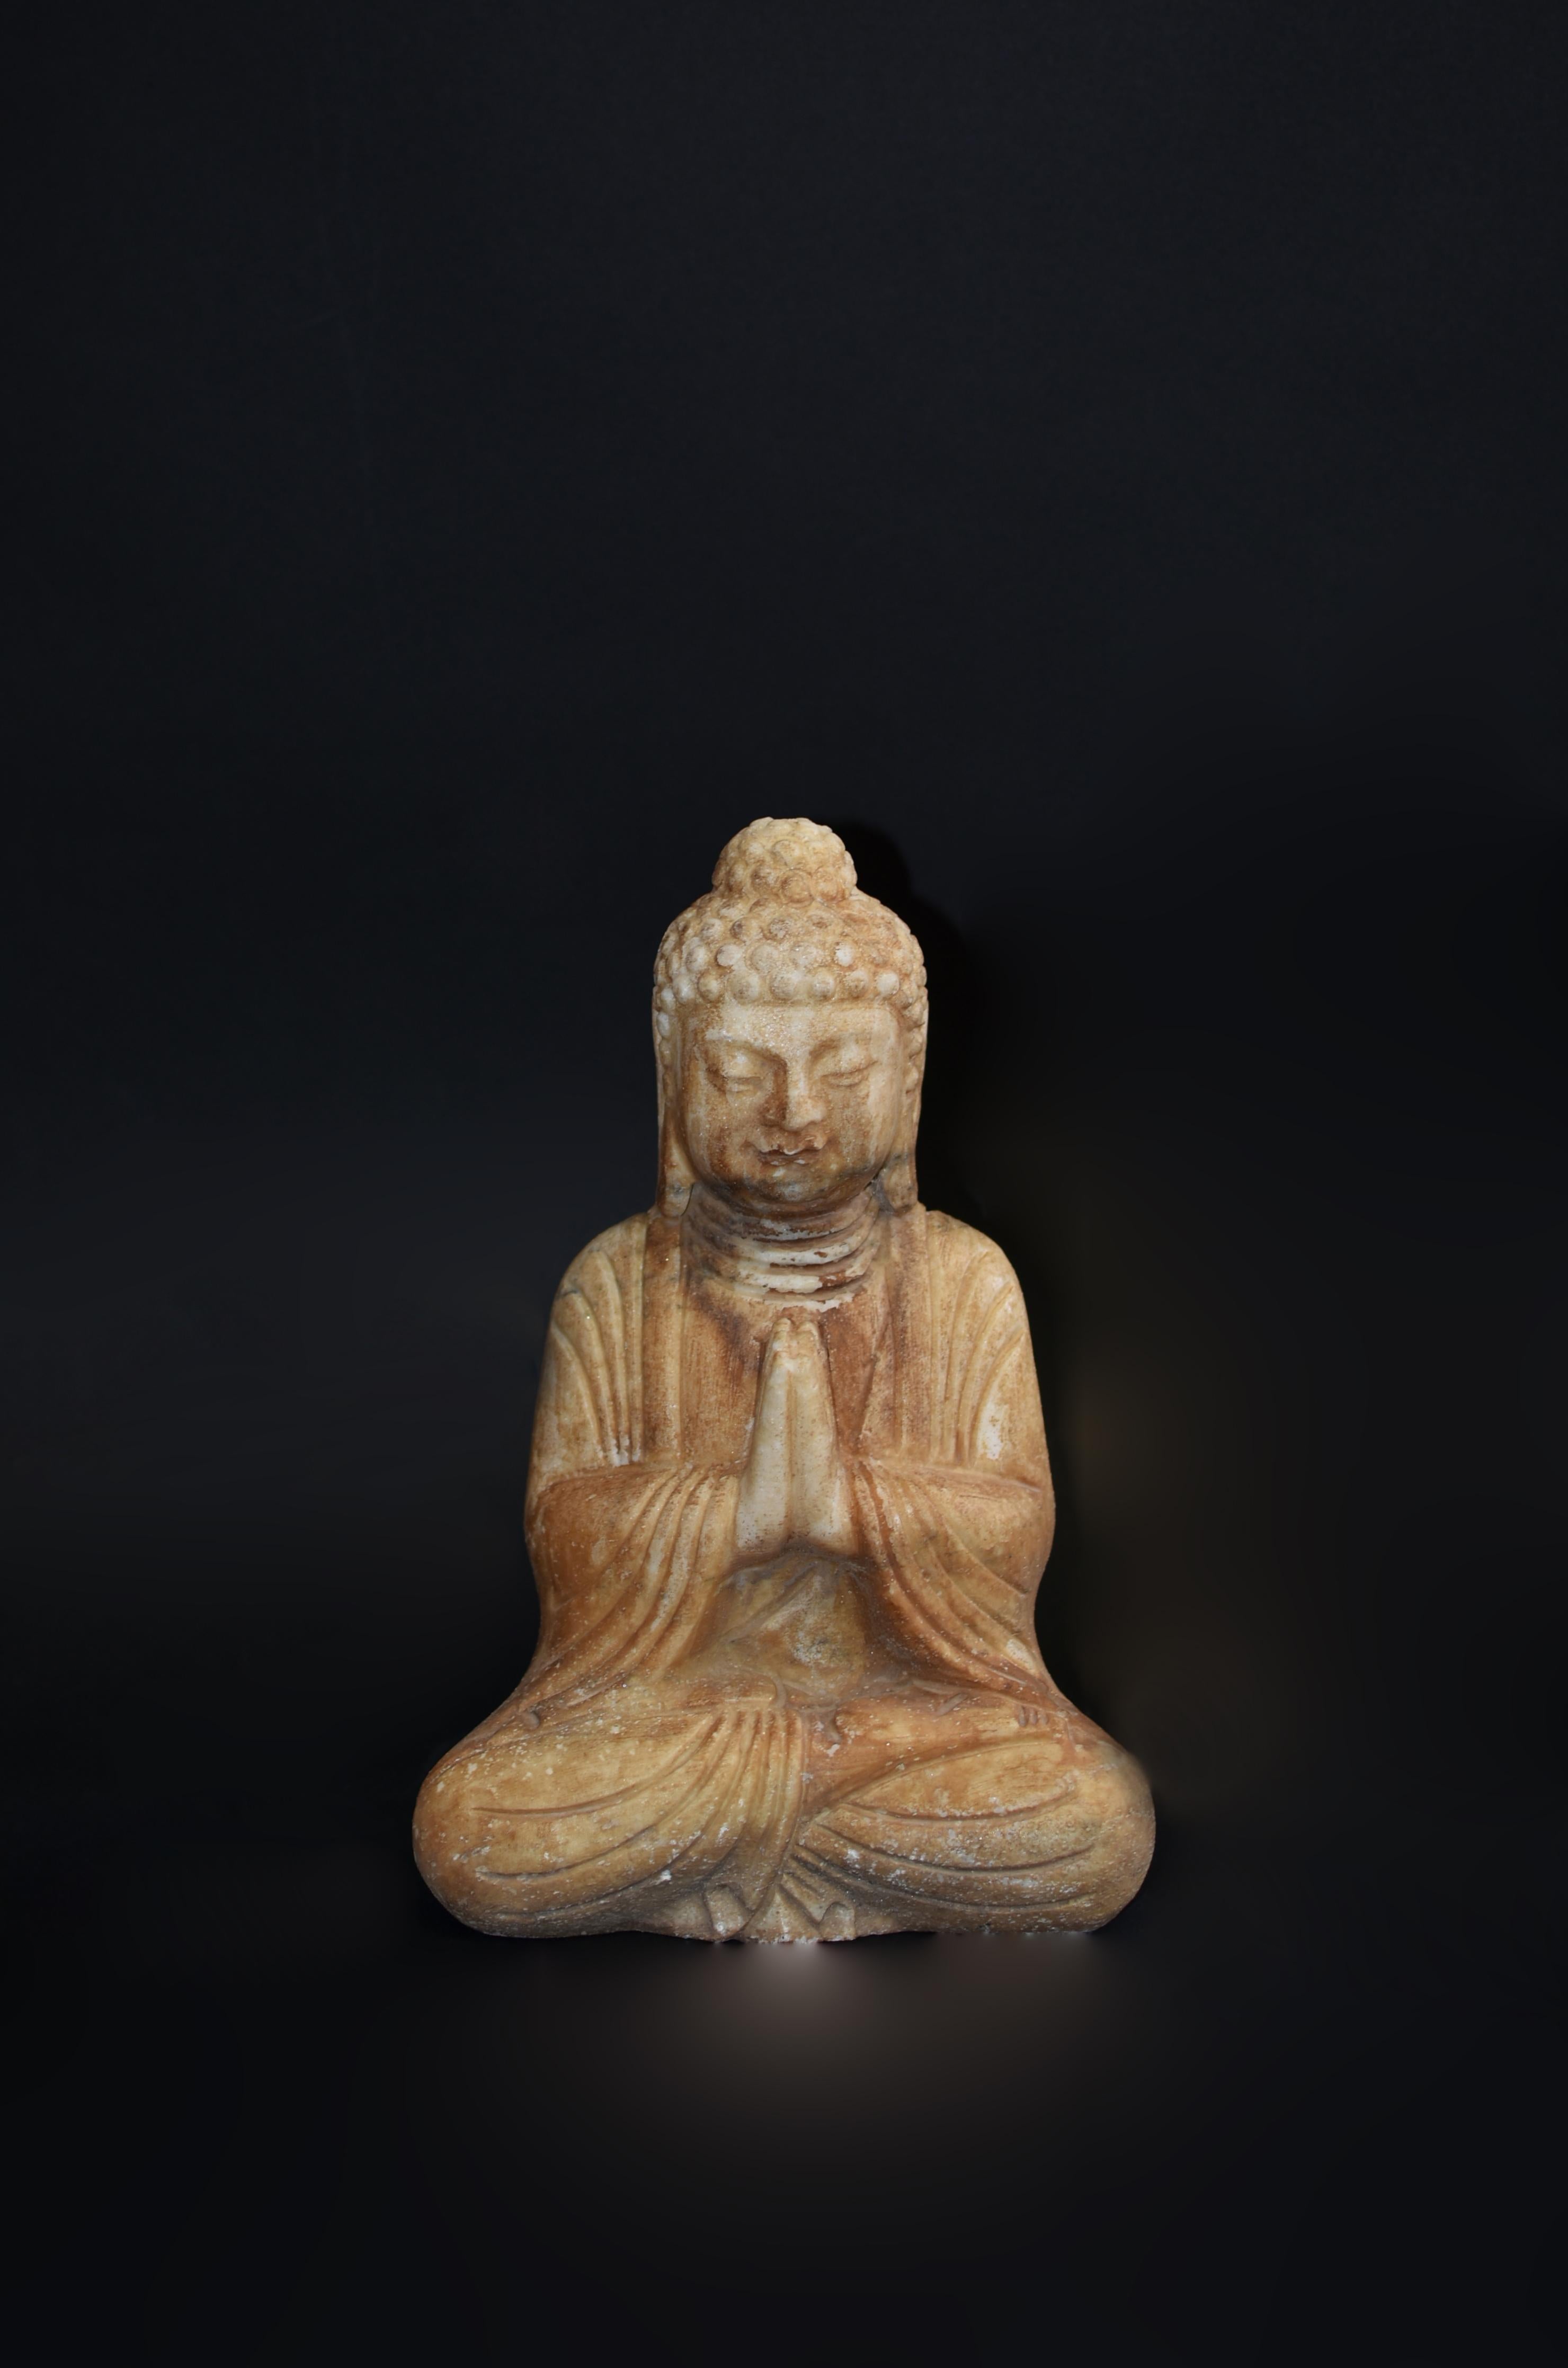 A hand carved solid marble Buddha statue. Seated dhyana asana with hands in namaskar mudra, Buddha has smiling countenance with broad face and large downcast eyes, flanked by pendulous earlobes, conveys sense of peace and harmony. He wears a fluid